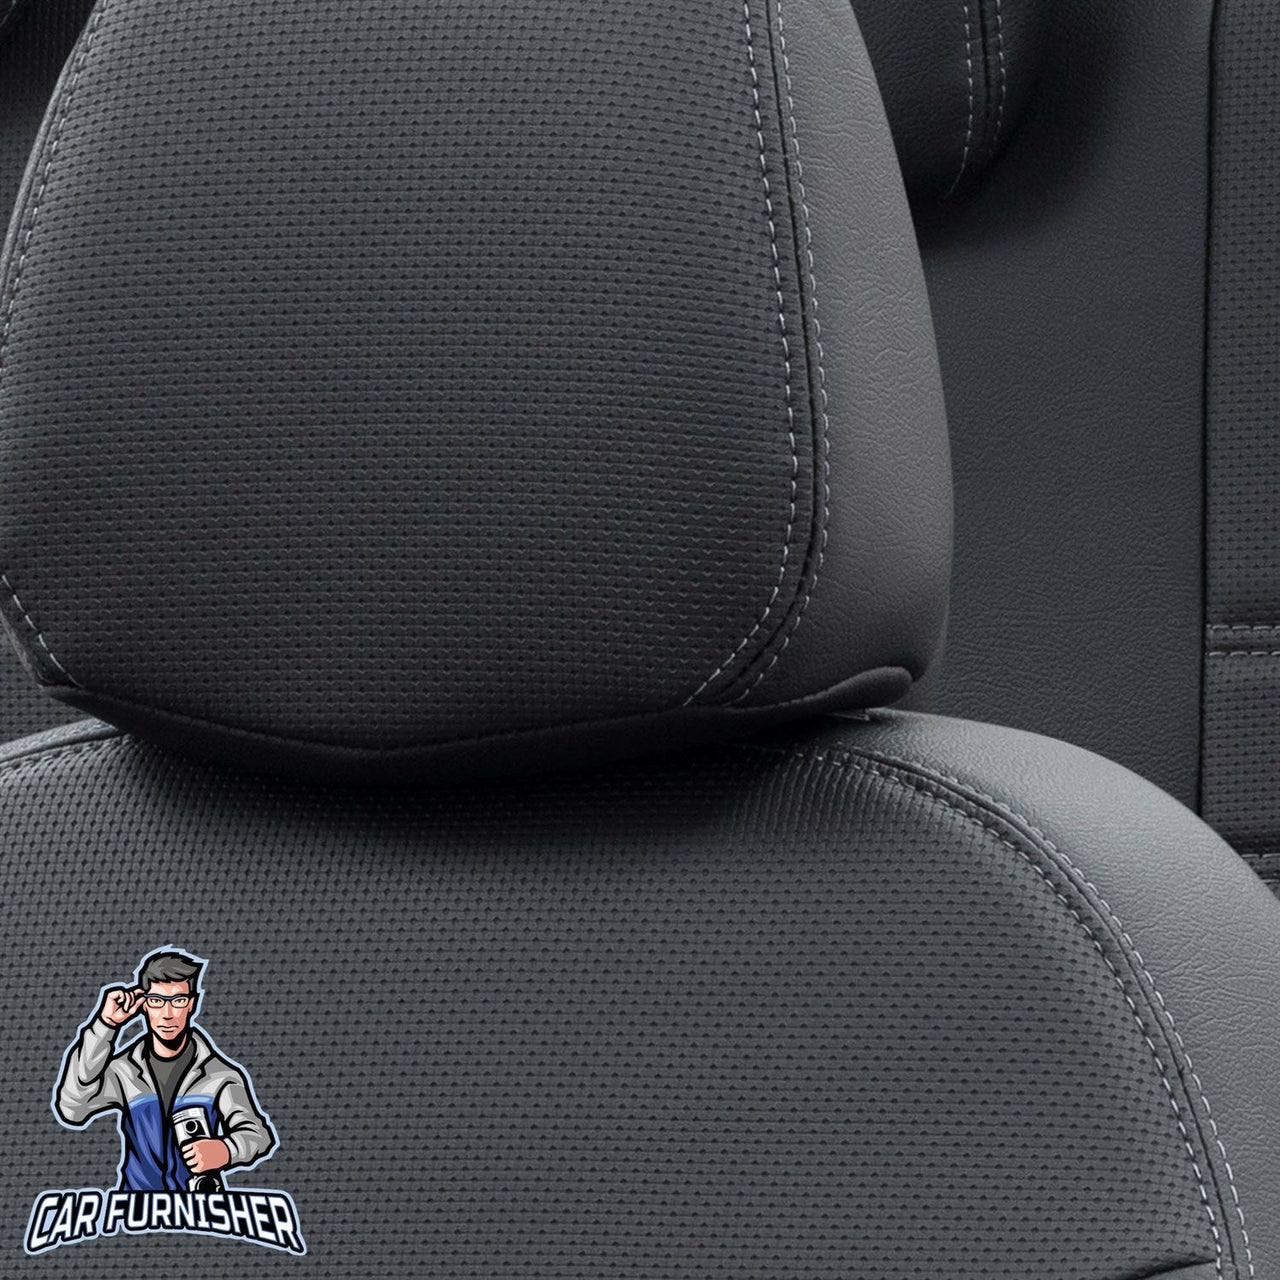 Jeep Grand Cherokee Seat Cover New York Leather Design Black Leather